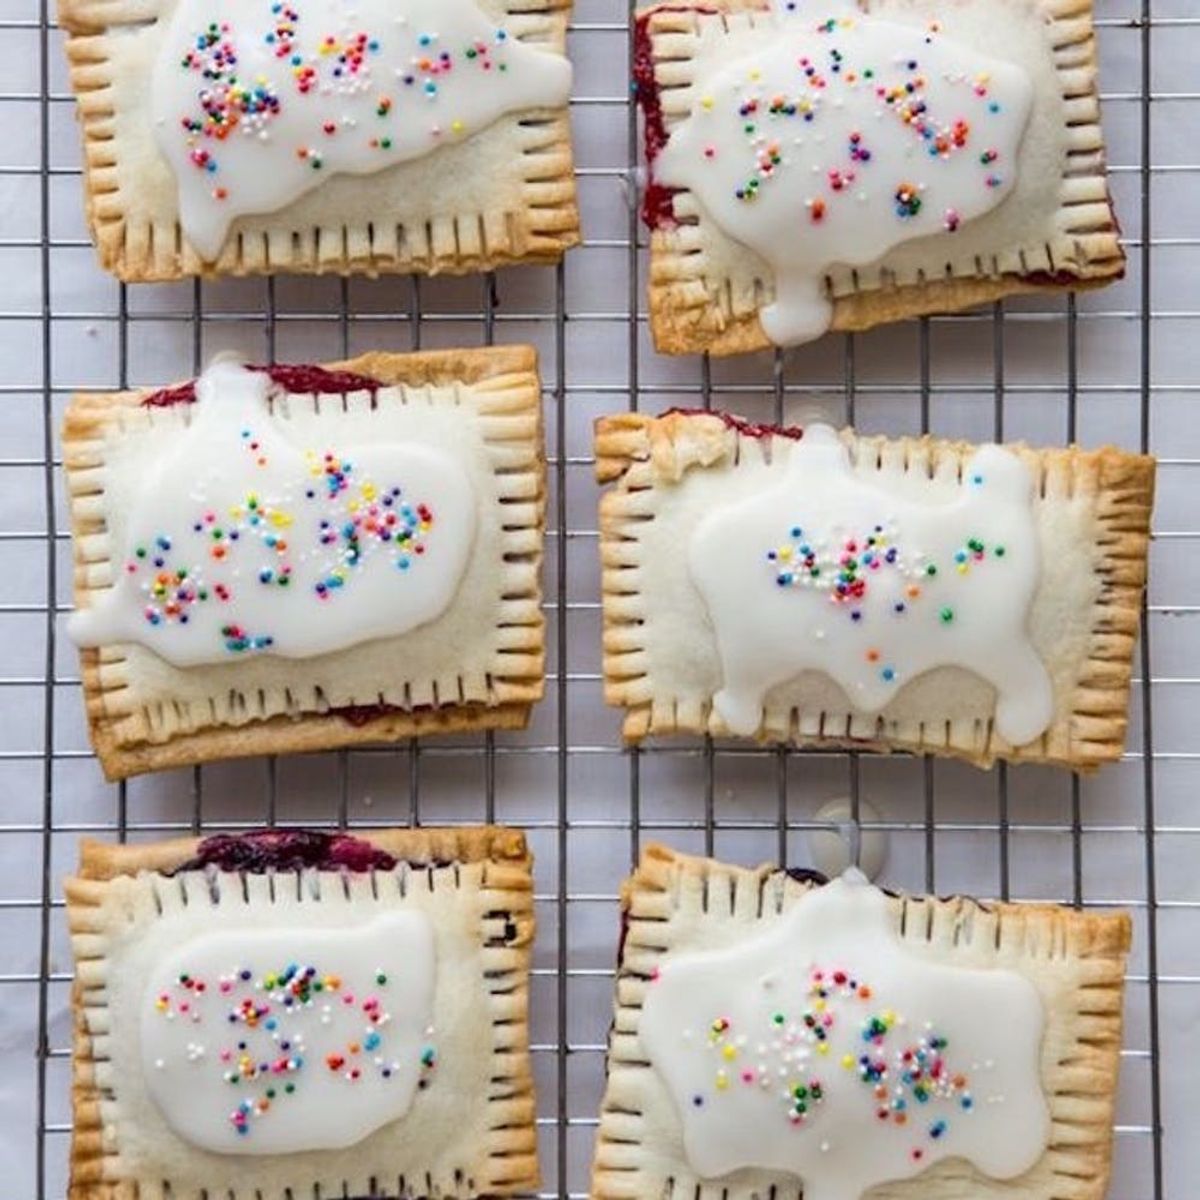 Lighten Things Up With These 13 Healthy Pop Tart Recipes